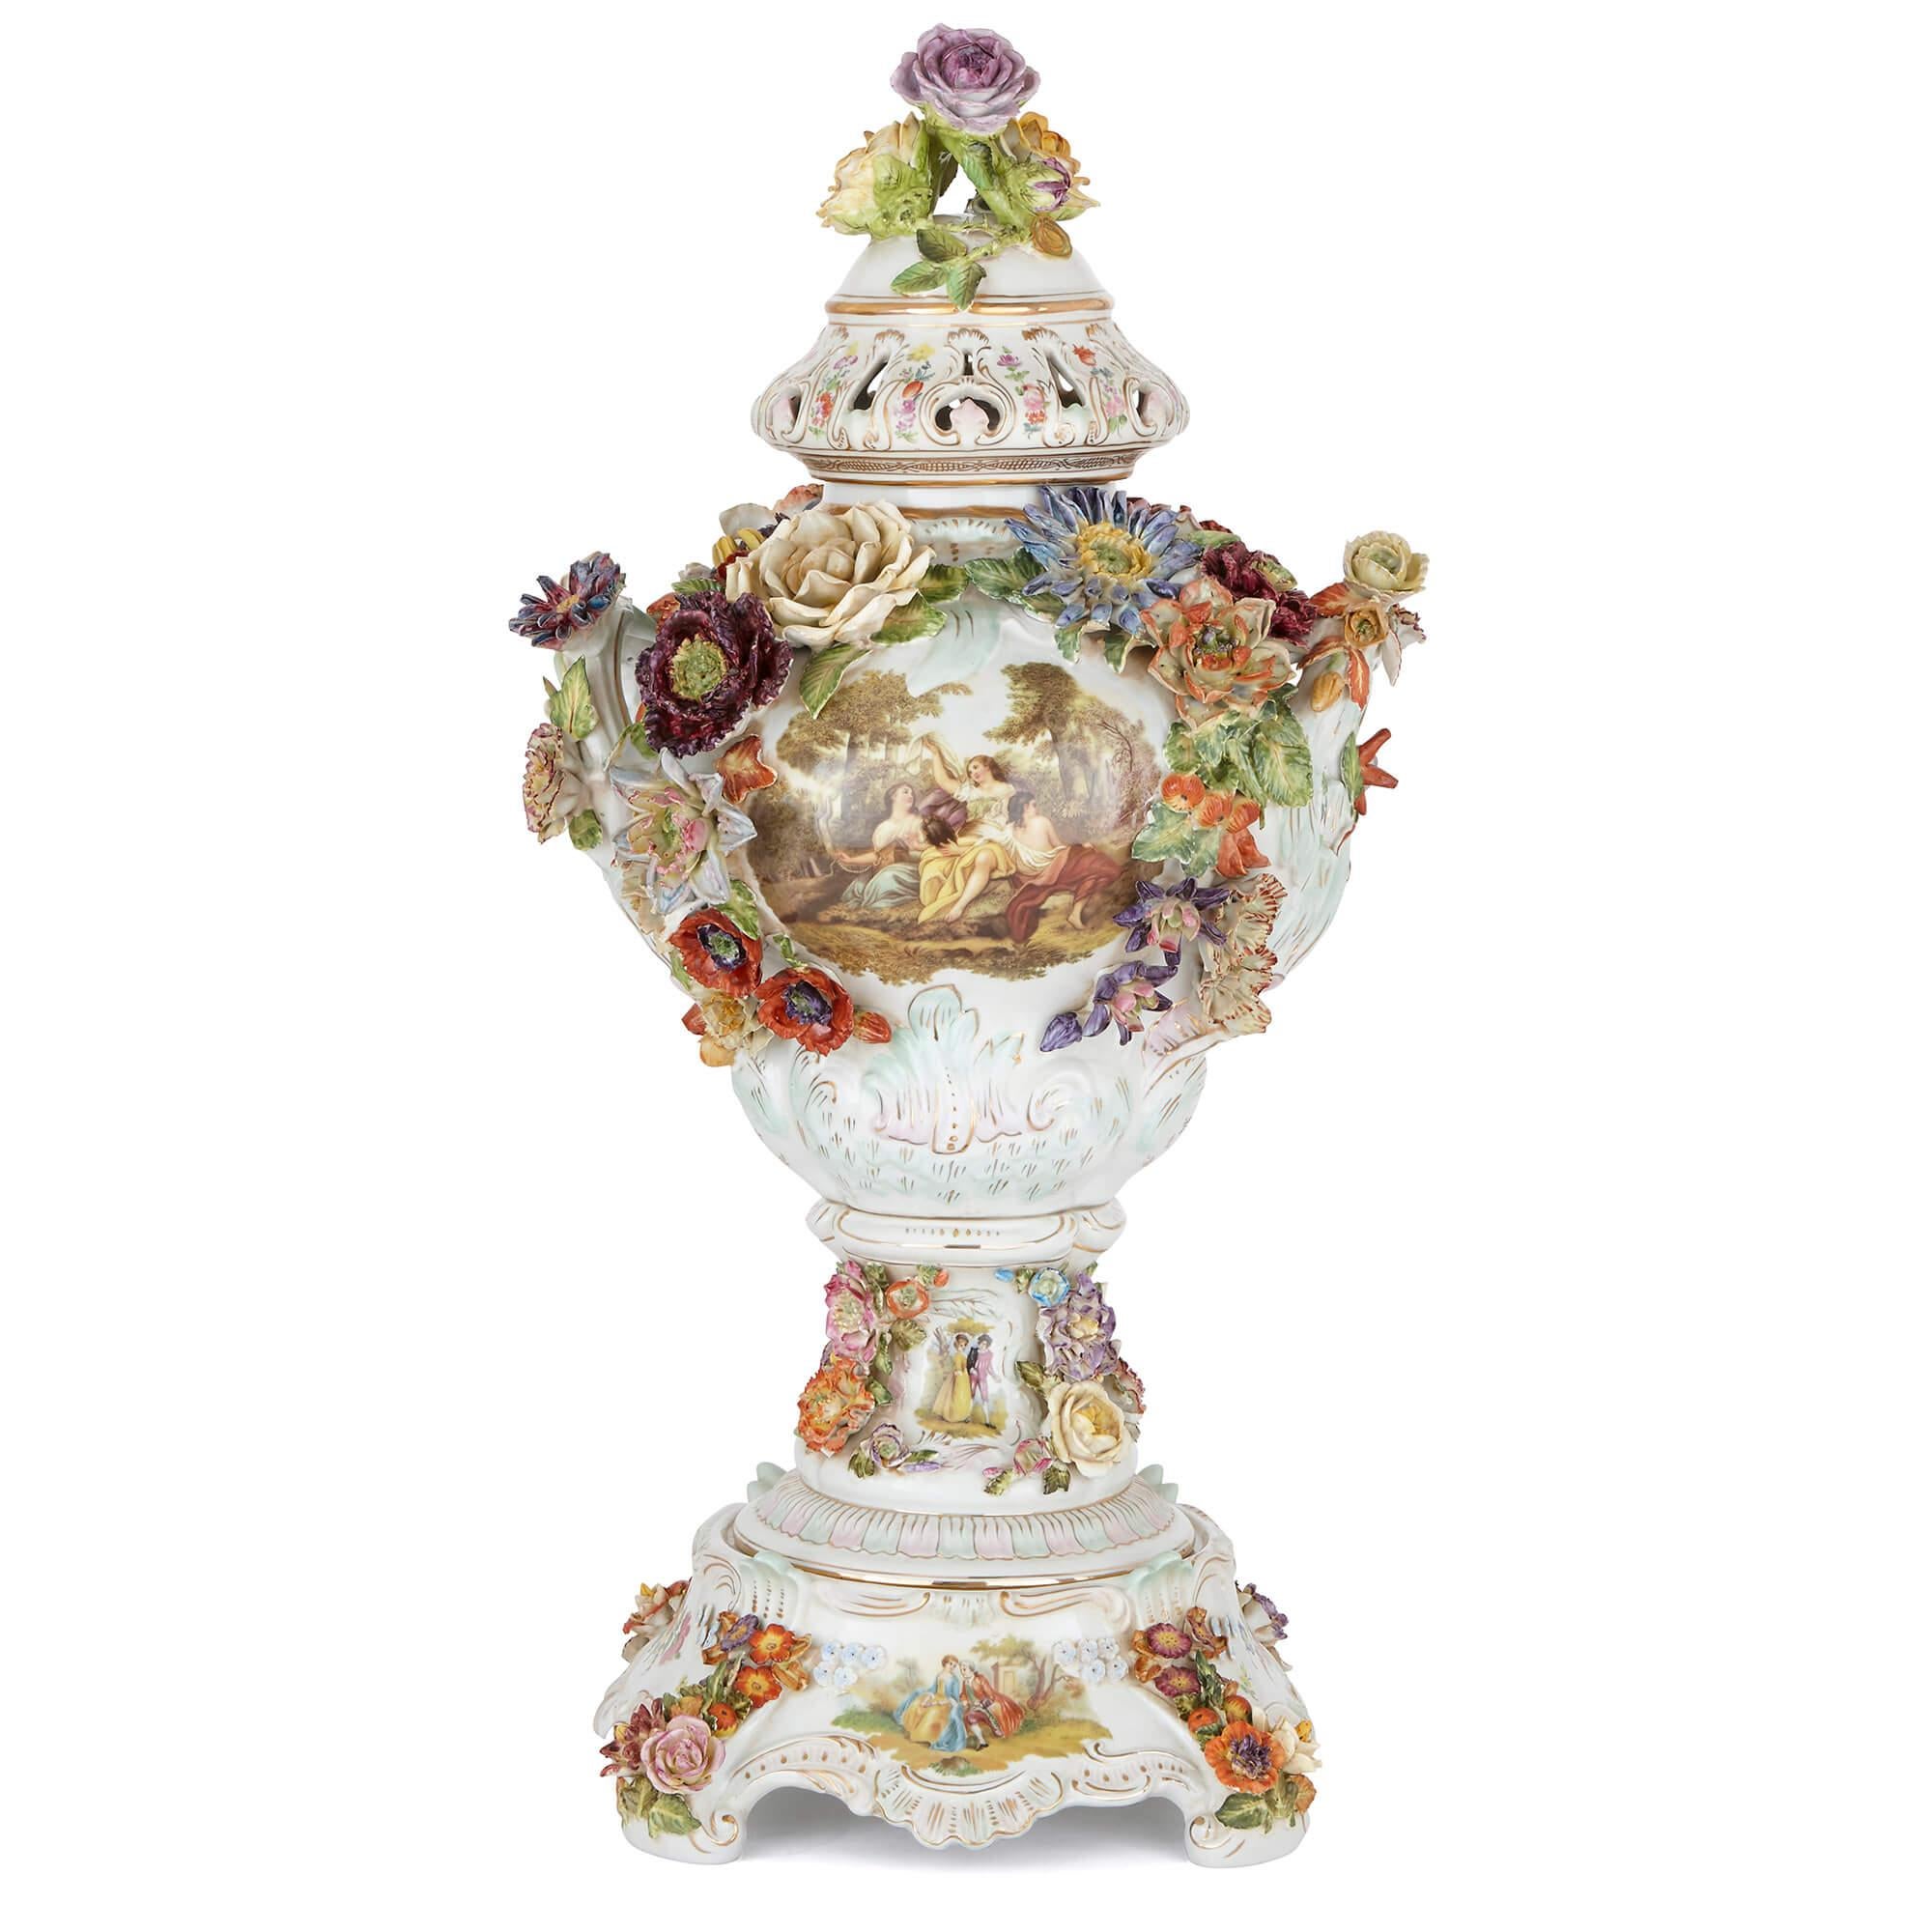 These ostentatious, lively vases are exceptional examples of the ceramicist's craft, set with intricate floral decorations as well as Rococo style cartouches. They are the work of the Carl Thieme Porcelain Manufactory in Dresden, probably the name